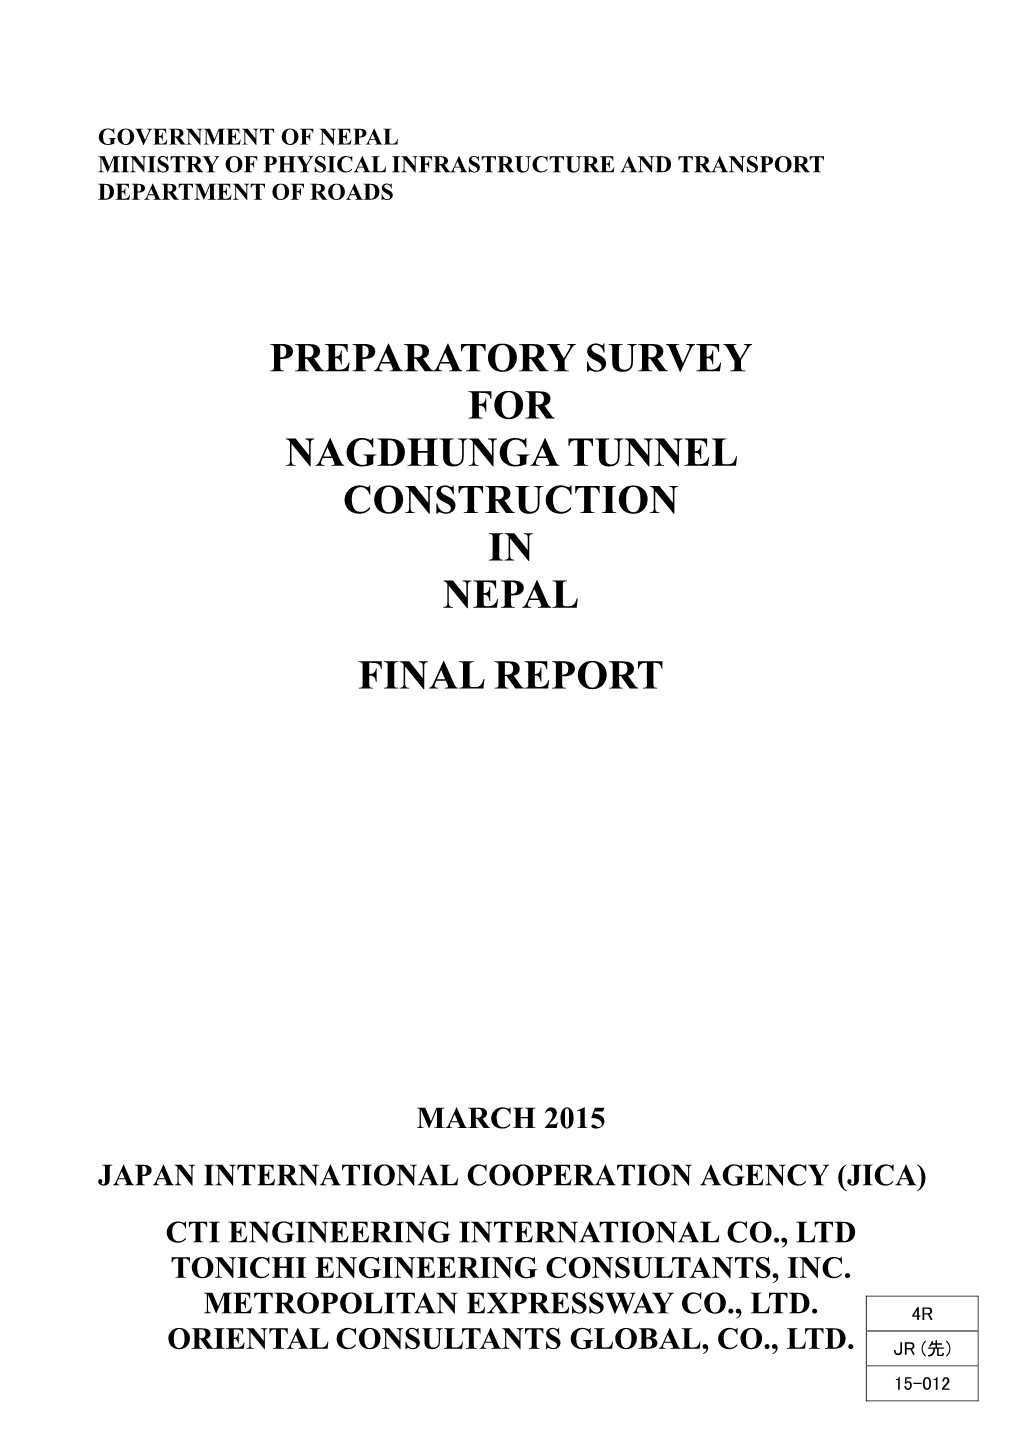 Preparatory Survey for Nagdhunga Tunnel Construction in Nepal